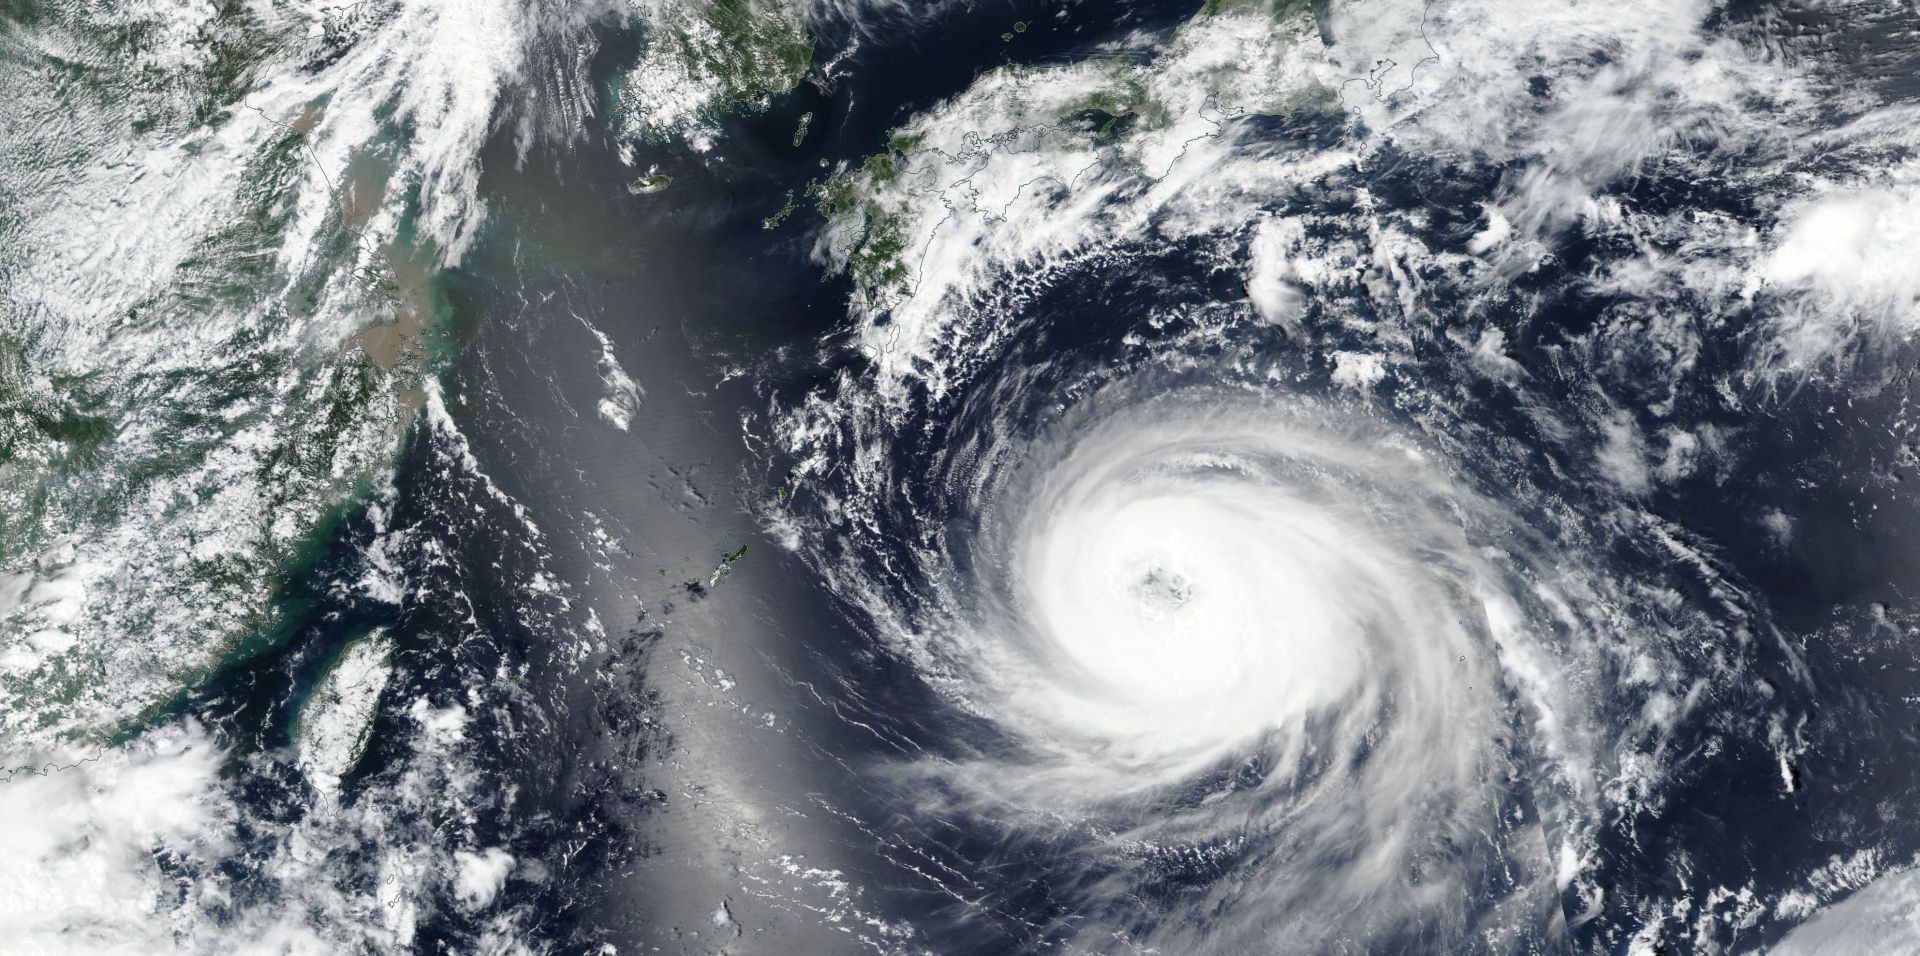 epa06961403 A handout photo made available by NASA shows an image acquired by the Visible Infrared Imaging Radiometer Suite (VIIRS) on board the joint NASA/NOAA Suomi National Polar-orbiting Partnership (SNPP) satellite of Typhoon Soulik approaching the Korean Peninsula, 20 August 2018 (issued 21 August 2018). According to media reports, Typhoon Soulik will make a direct pass over the Korean Peninsula on the night of 22 August 2018 as it is expected to strengthen to Category 3.  EPA/NASA HANDOUT  HANDOUT EDITORIAL USE ONLY/NO SALES